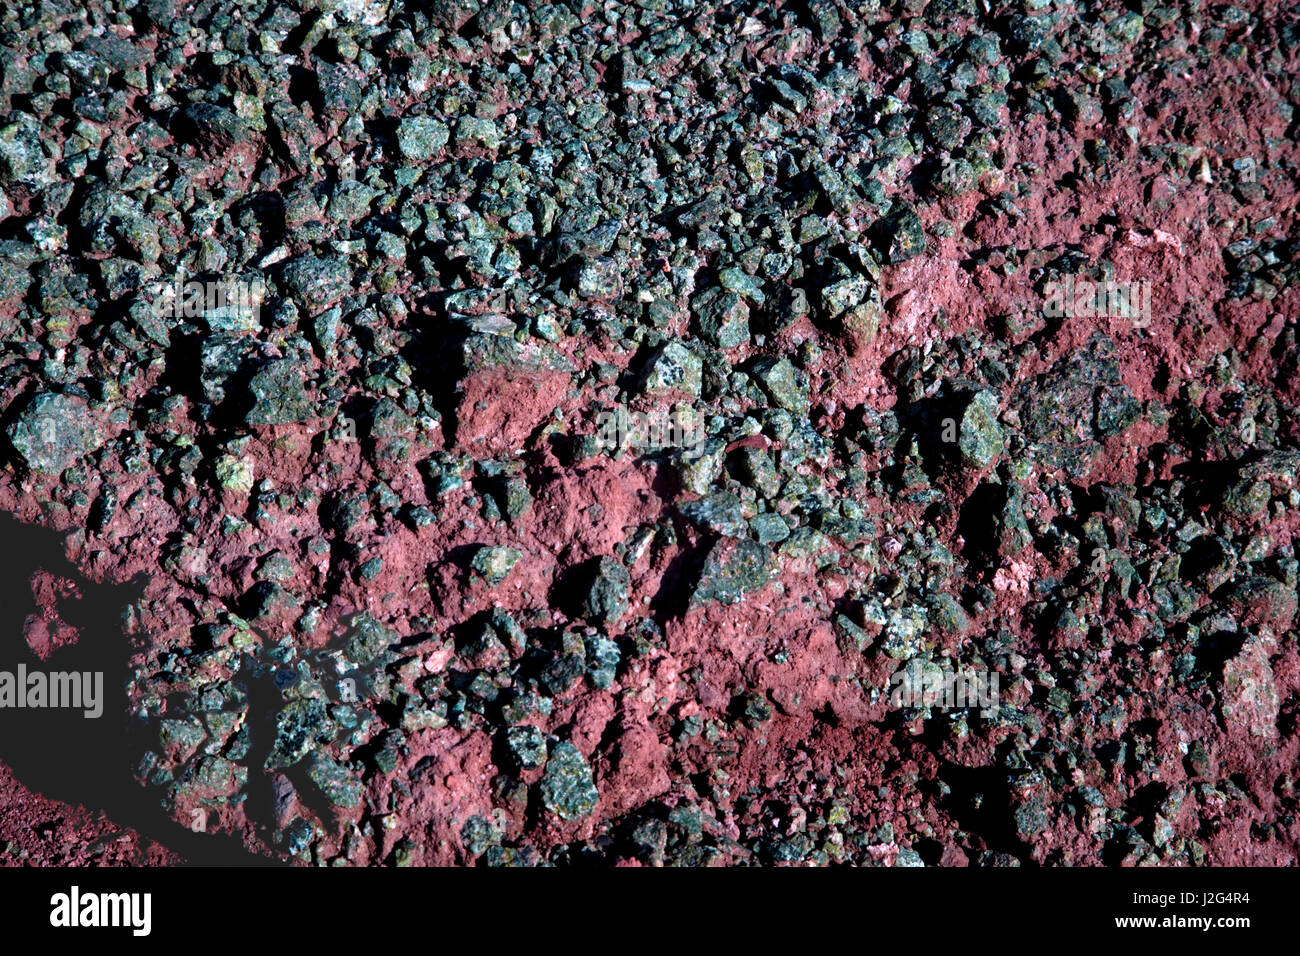 A tight close-up of the mineral rich rocks found in the Domeyko Mountains of the Chile. Stock Photo